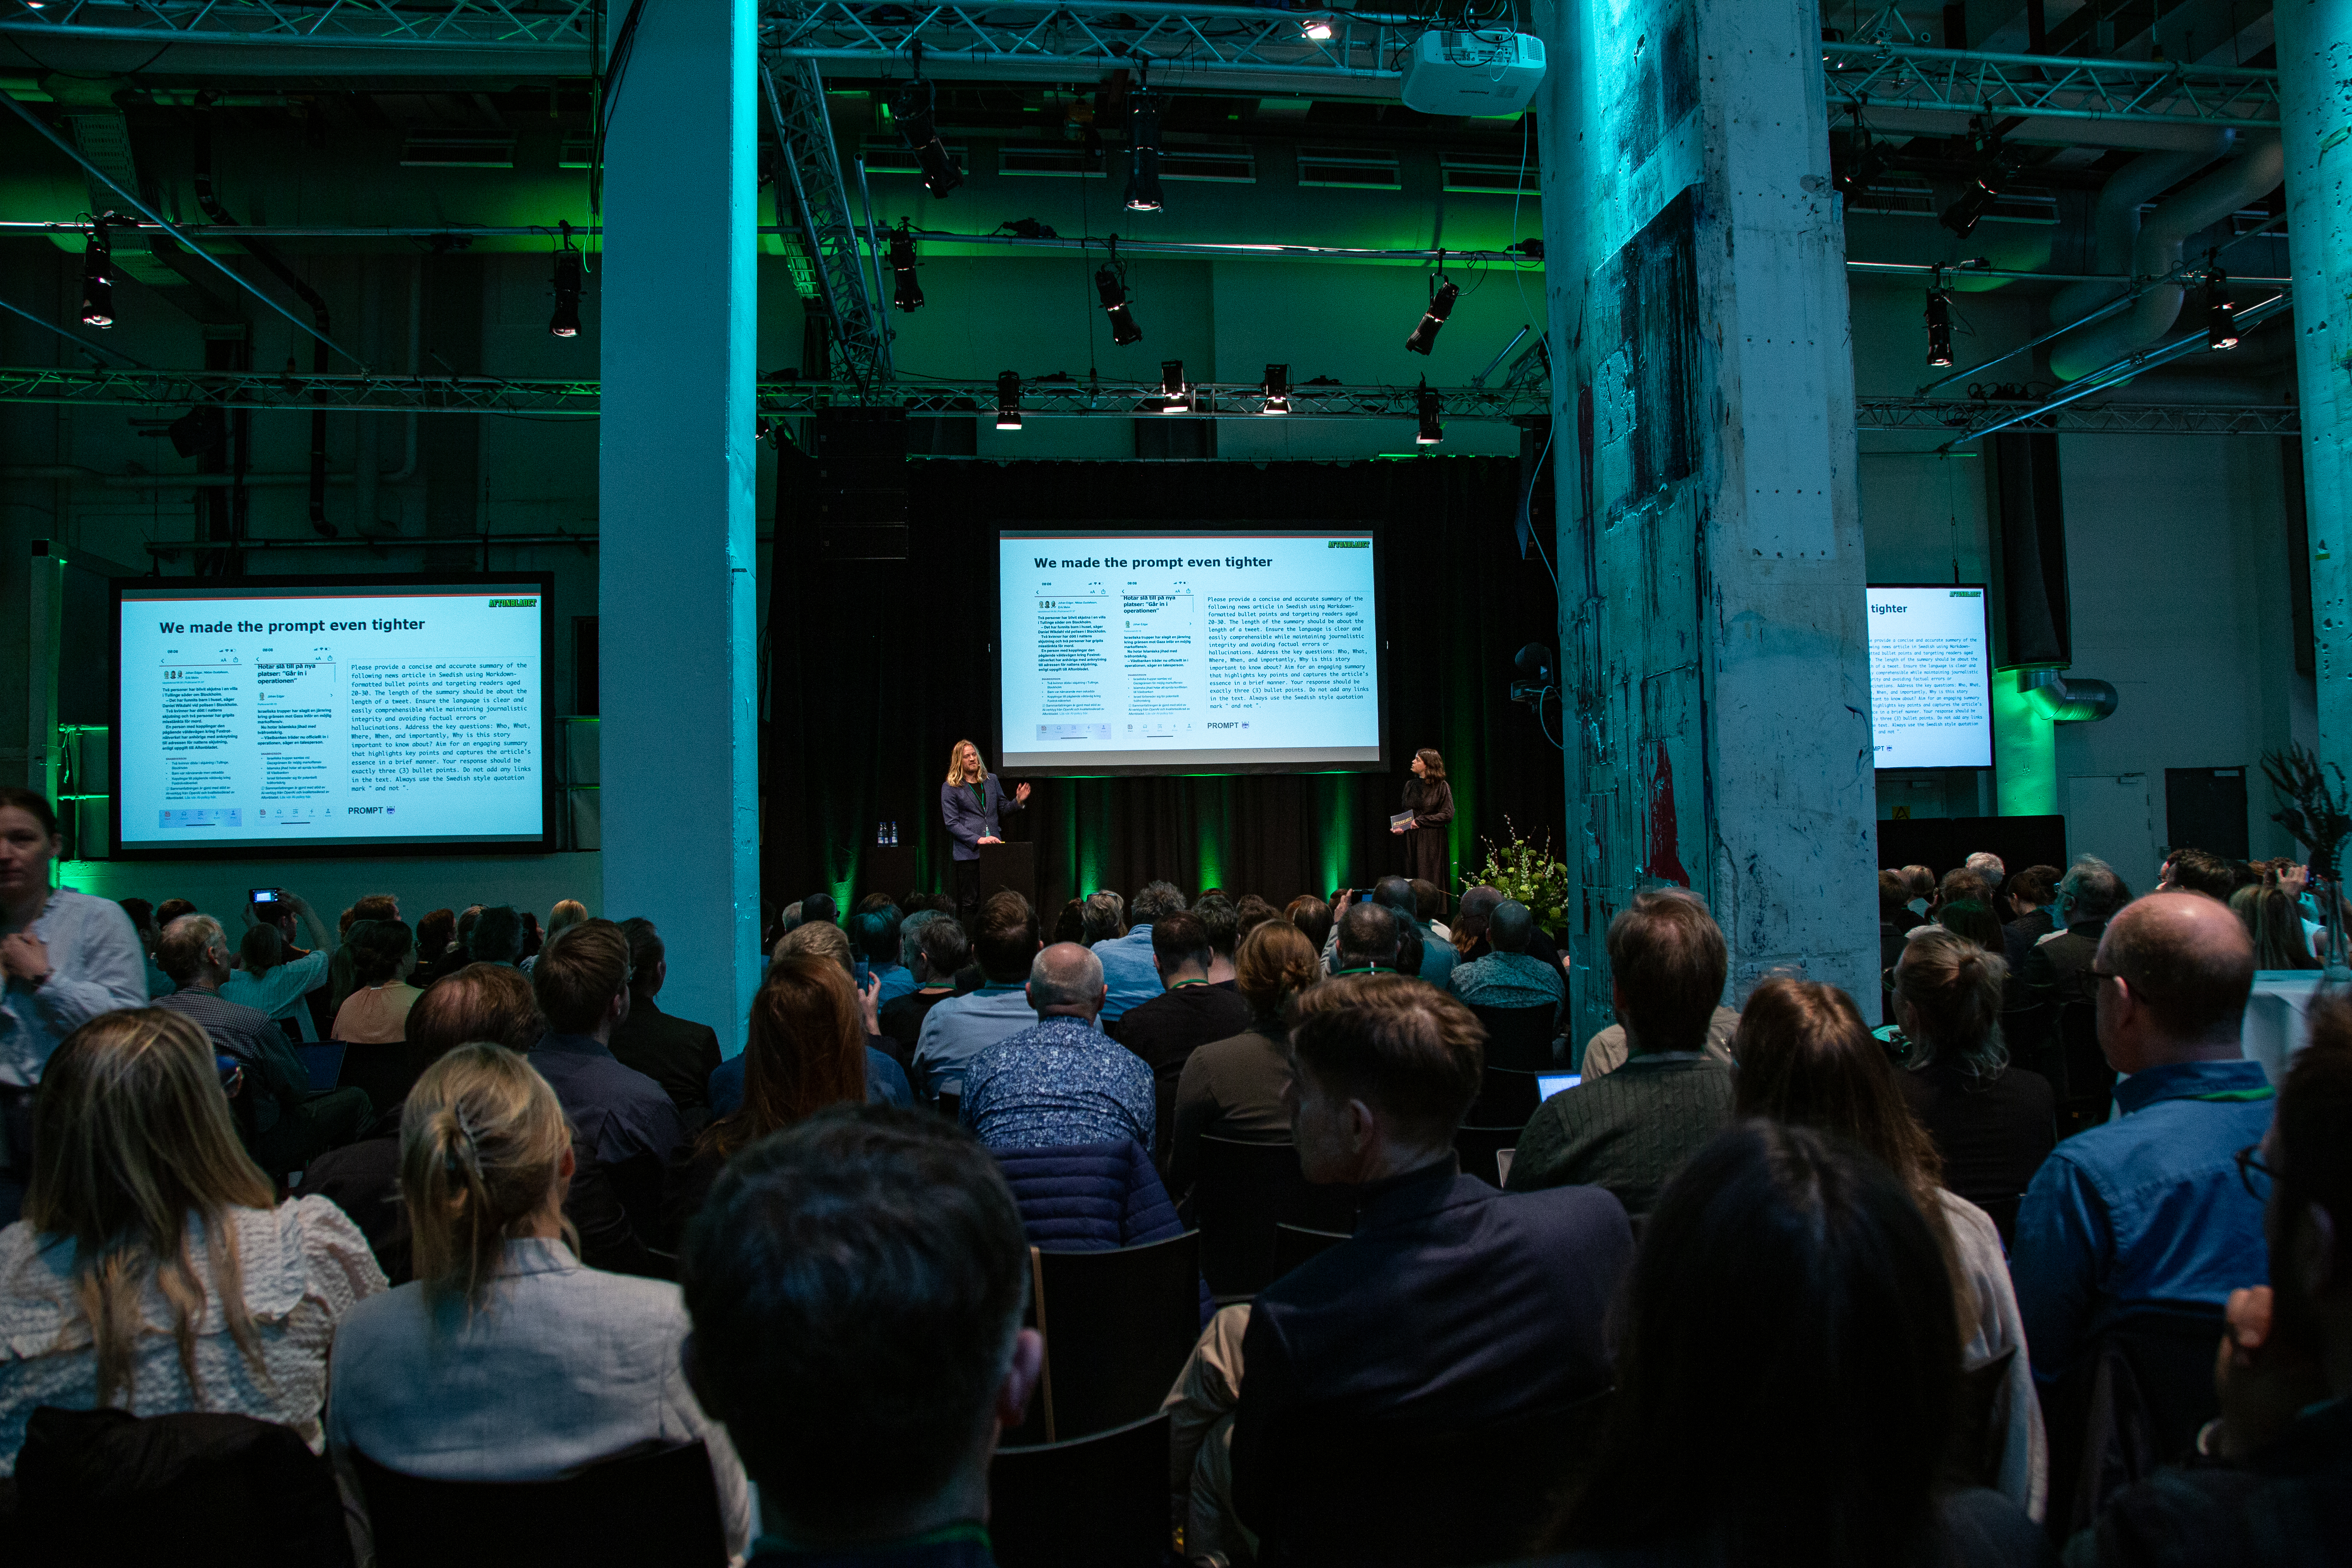 A photograph of Martin Schori and Elin Wieslander presenting their project on stage at the summit.